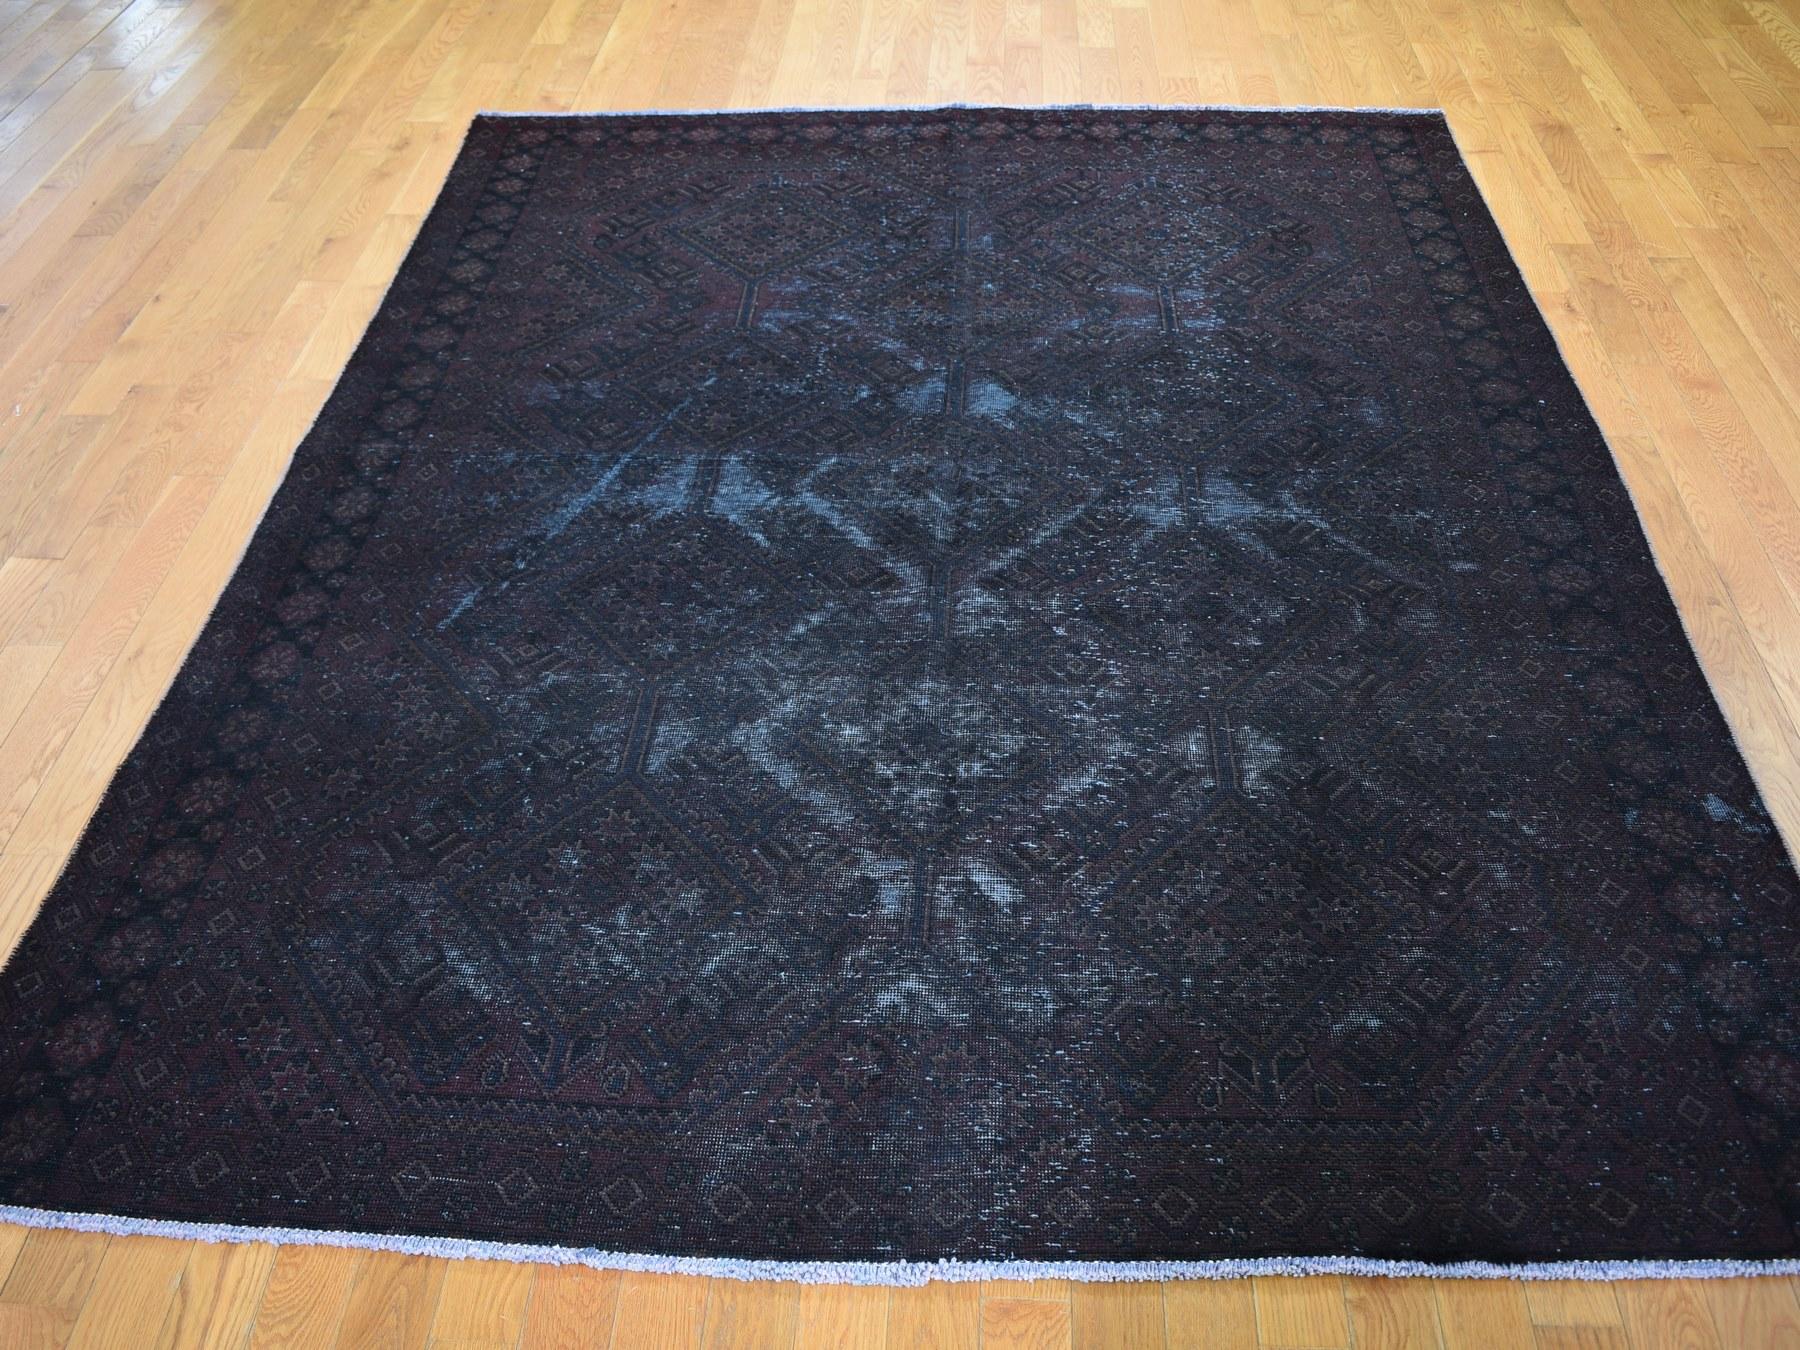 This fabulous hand knotted carpet has been created and designed for extra strength and durability. This rug has been handcrafted for weeks in the traditional method that is used to make Rugs. This is truly a one of kind piece. 

Exact rug size in